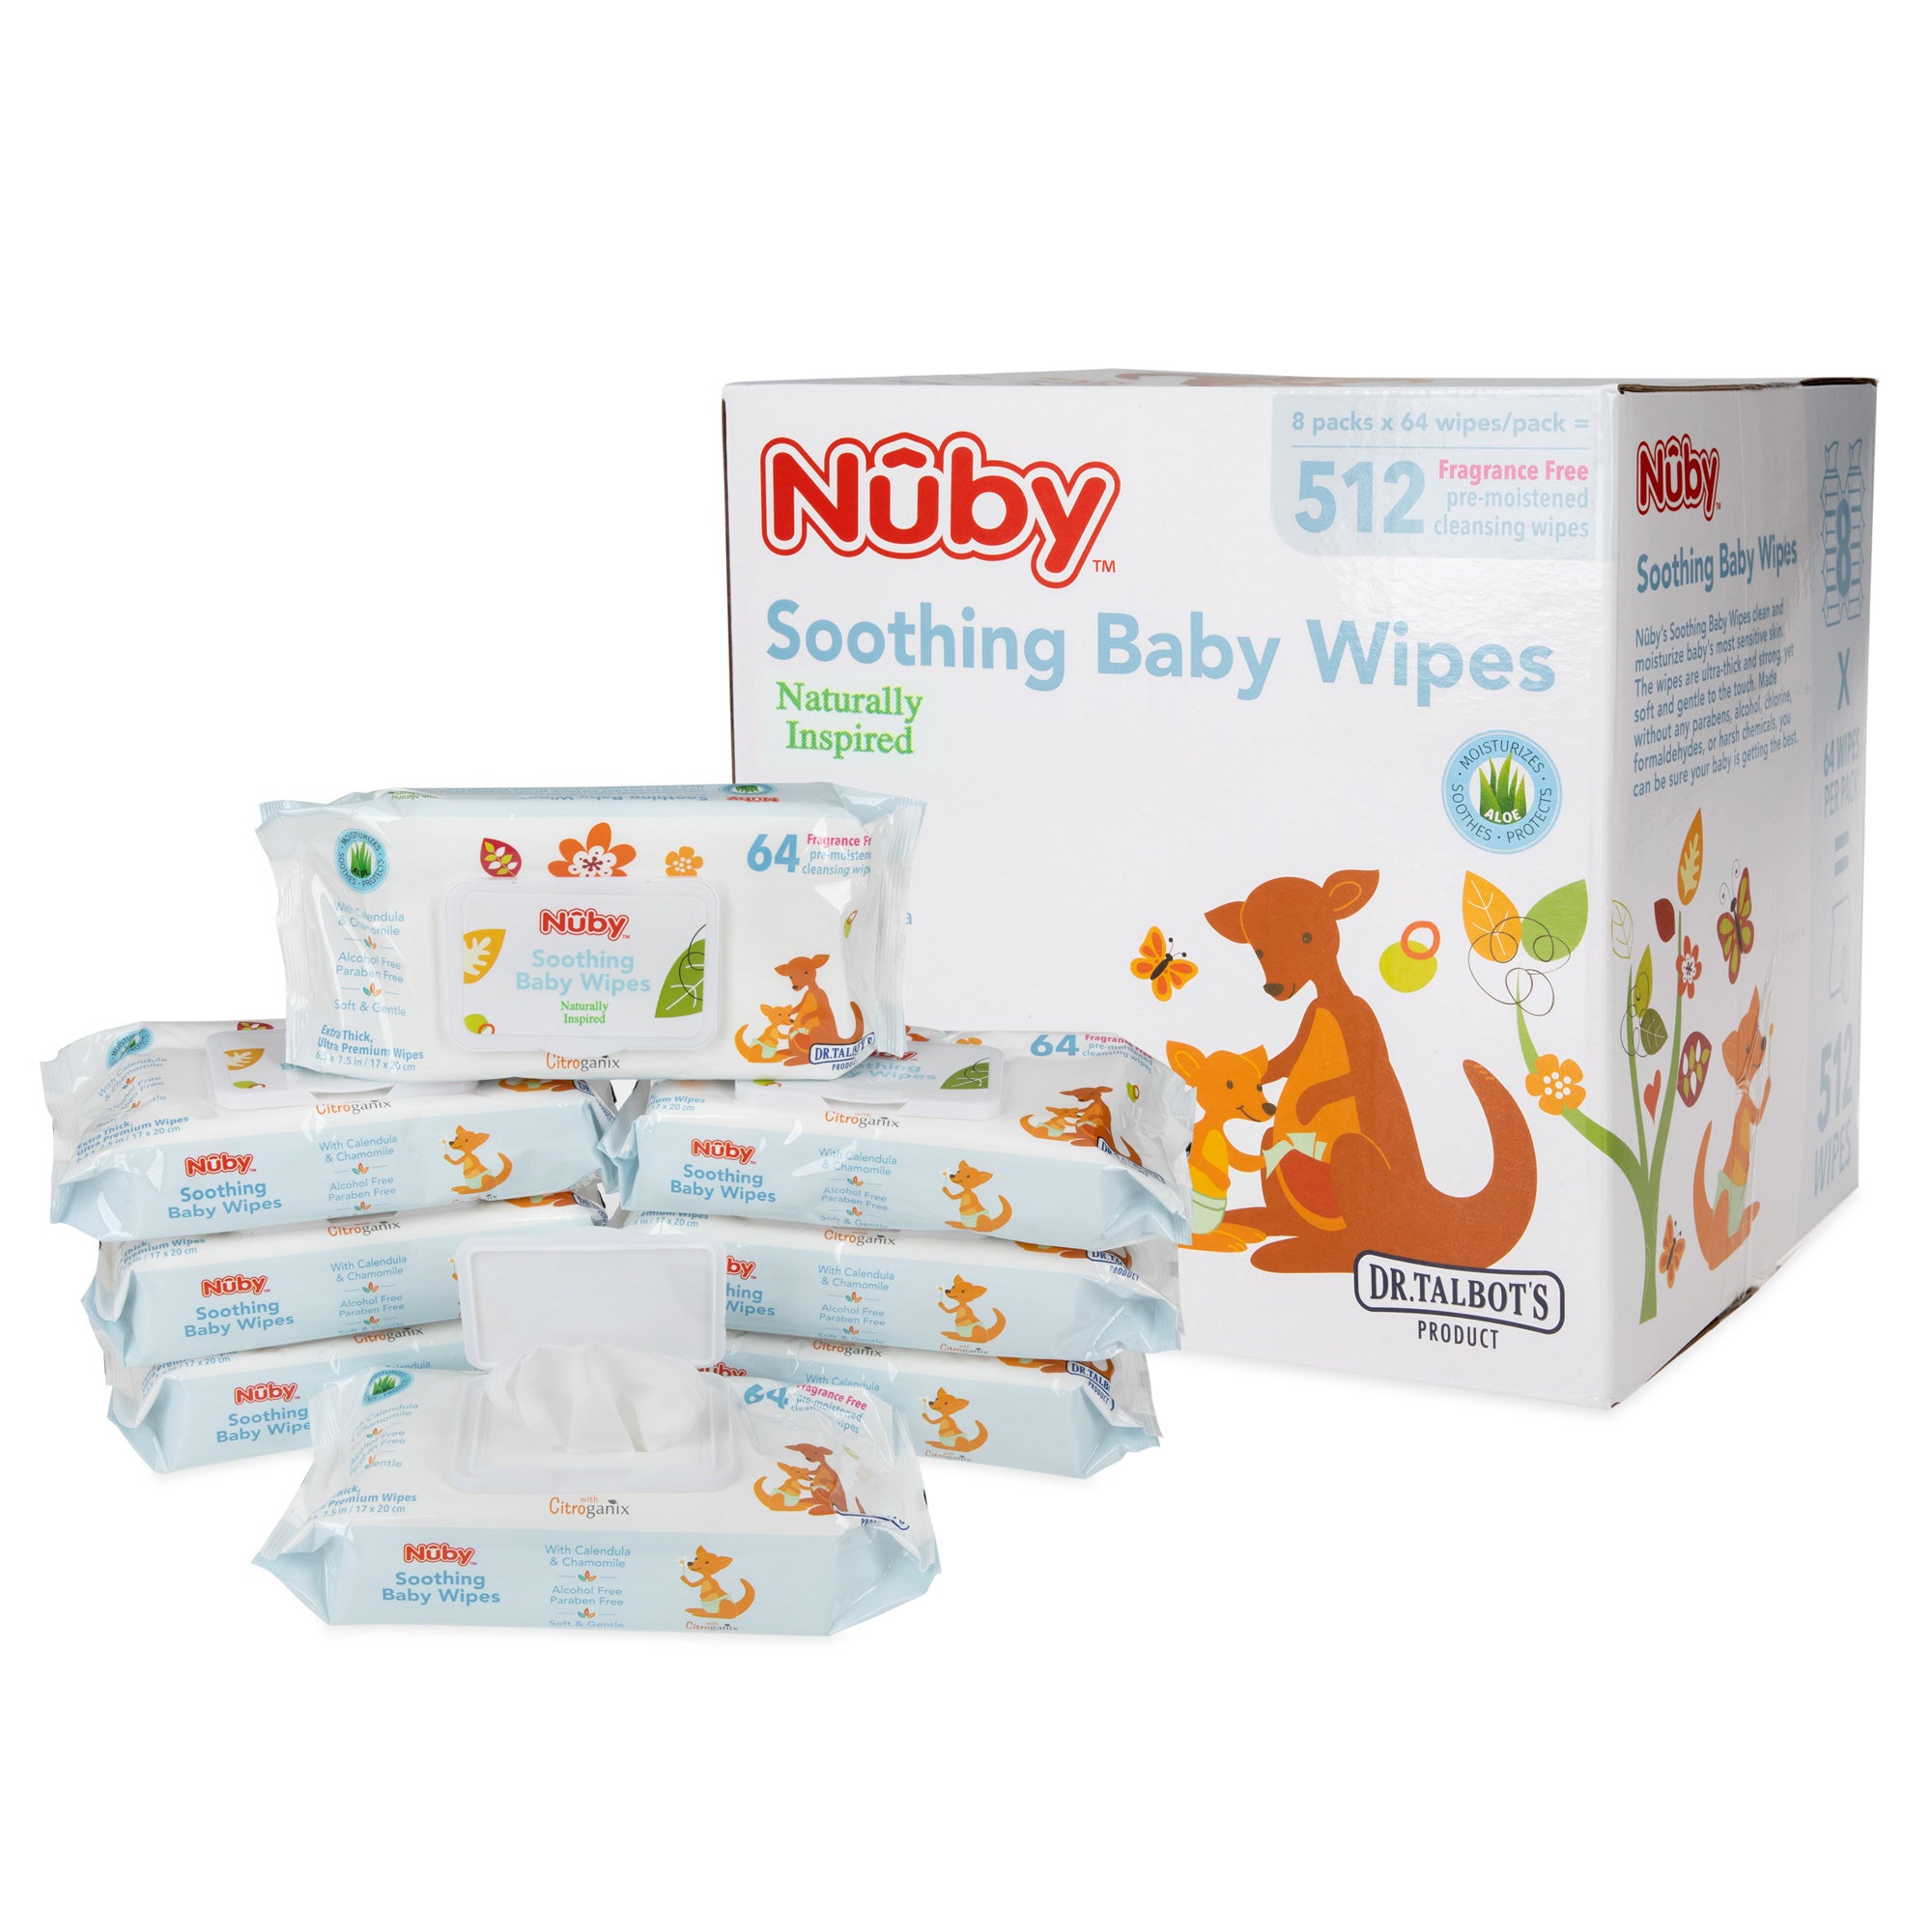 Nuby All Natural Pacifier and Teether Wipes - 48 Count